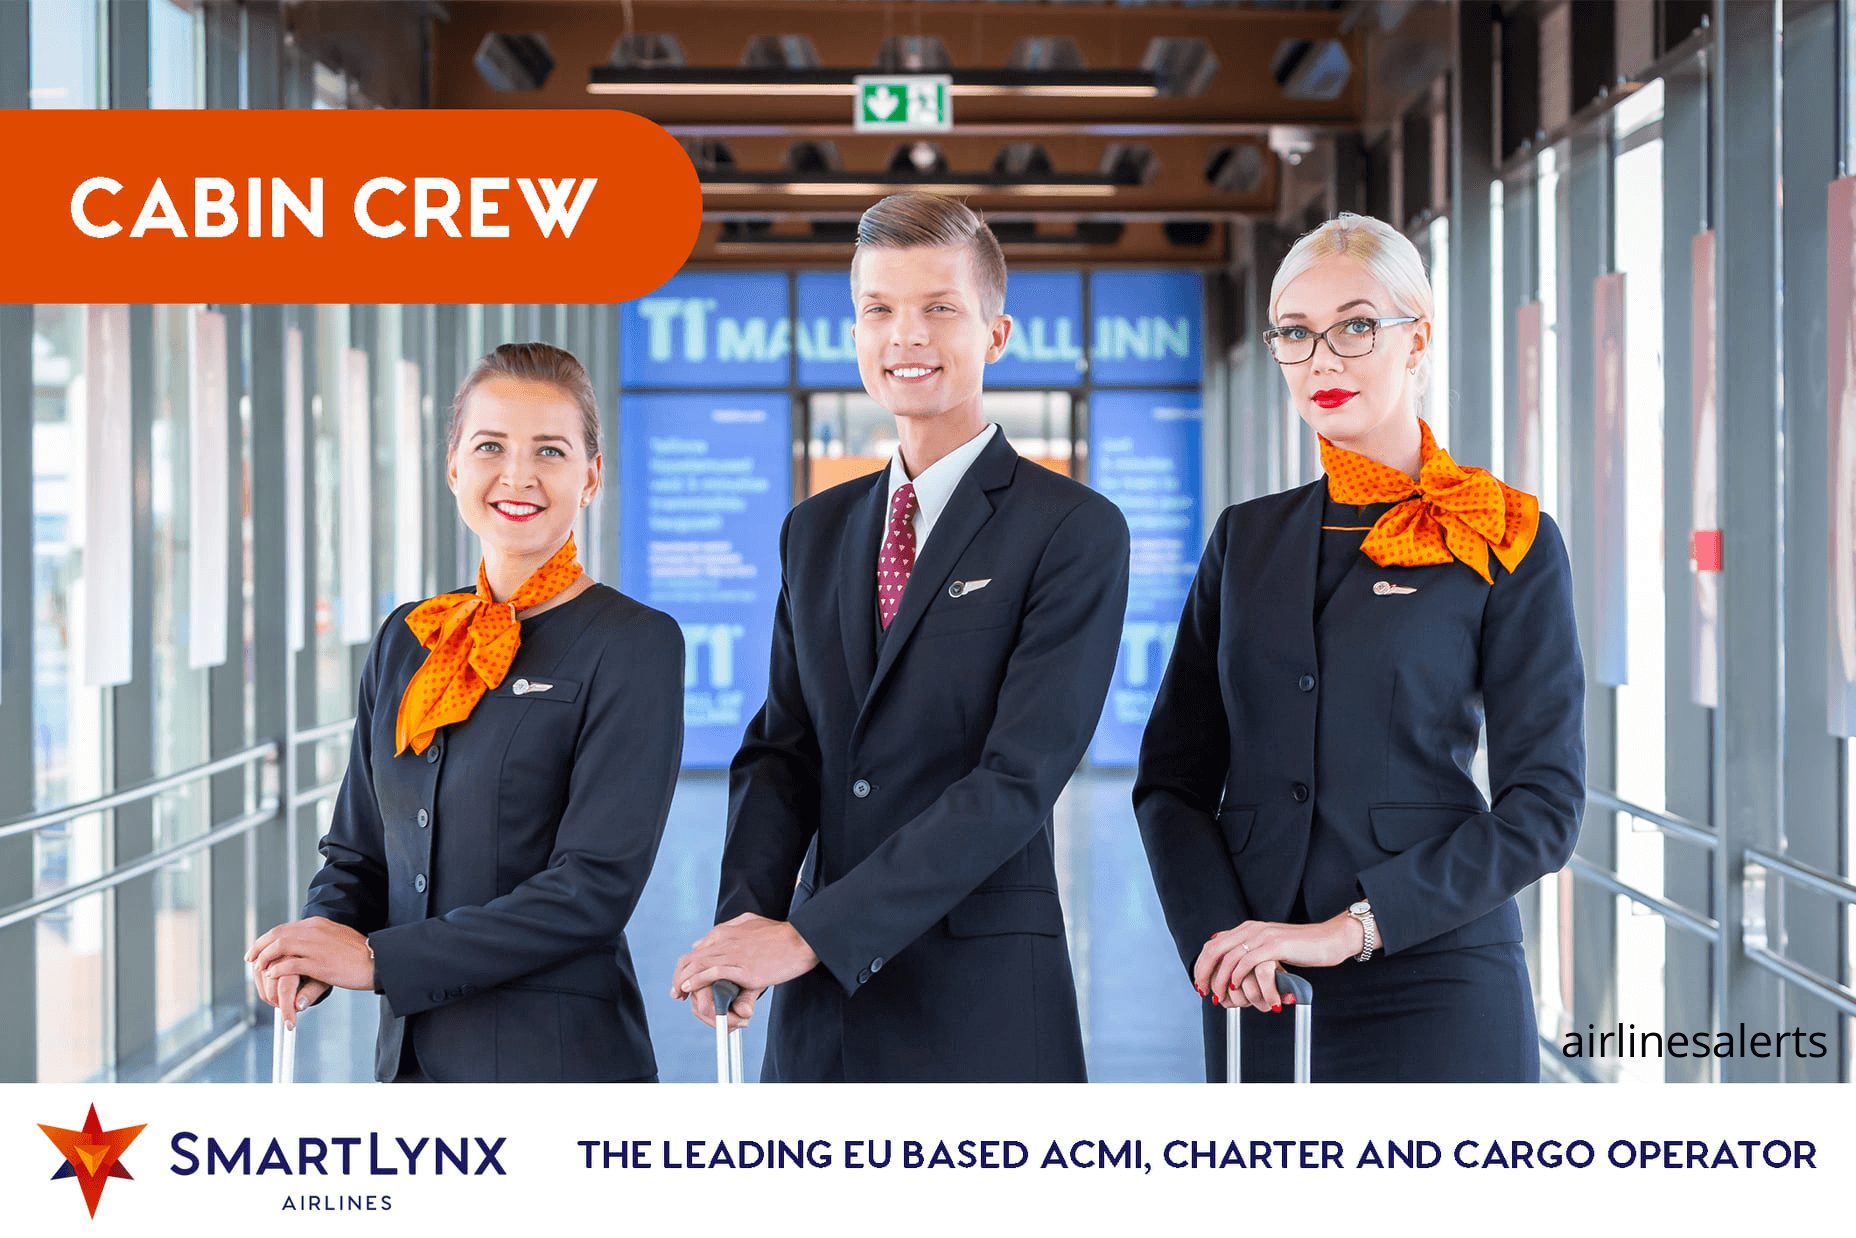 SmartLynx Airlines Cabin Crew Hiring (February 2022) Read Details & Apply Online 